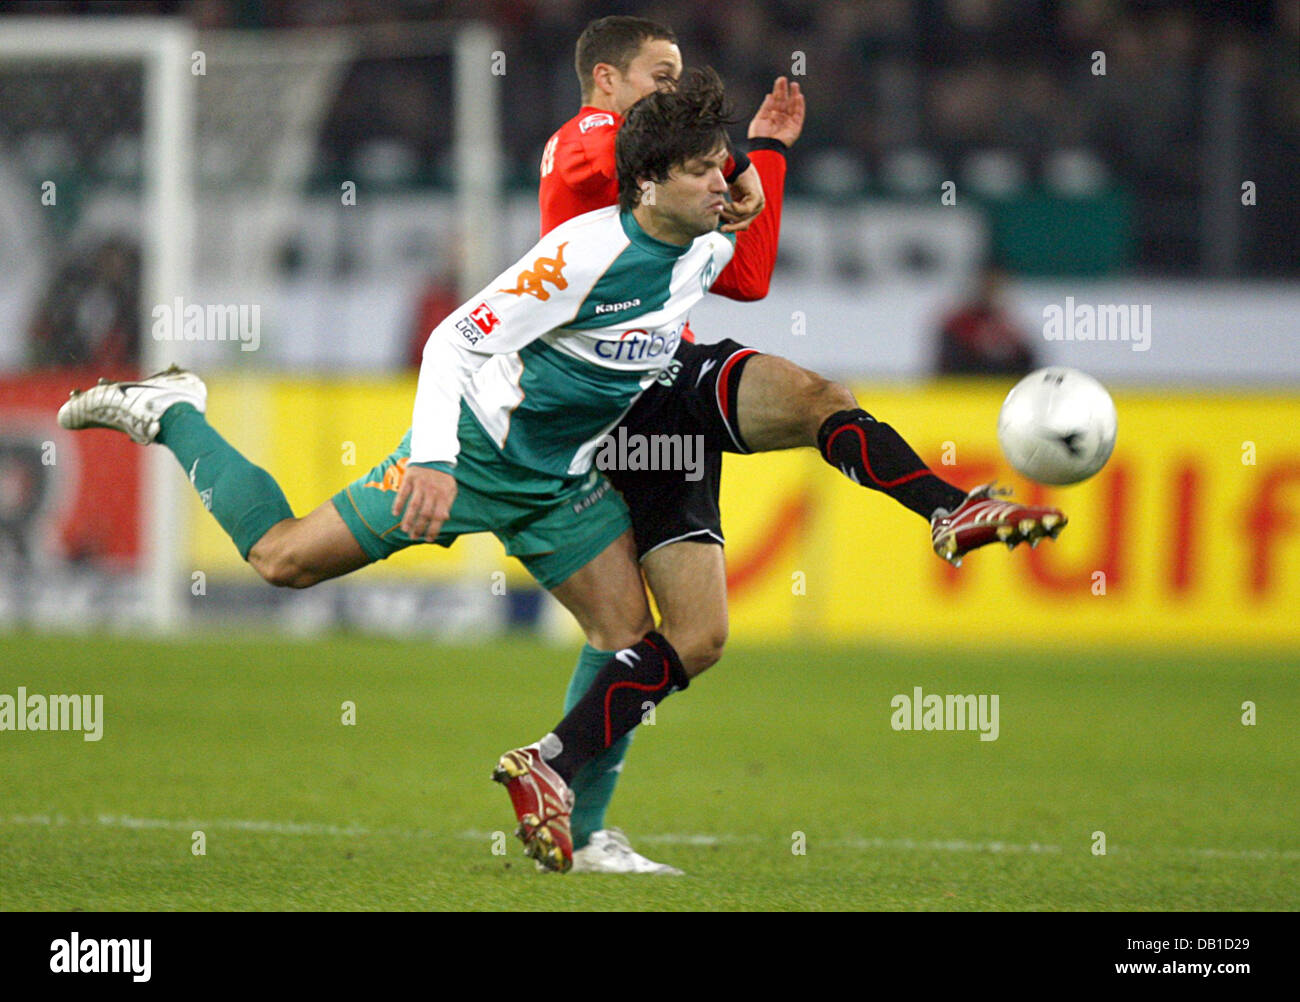 Steven Cherundolo (back) of Hanover vies for the ball with Diego of Bremen during the Bundesliga match Hanover 96 vs Werder Bremen at AWD-Arena stadium in Hanover, Germany, 08 December 2007. Hanover defeated Bremen 4-3. Photo: Jochen Luebke Stock Photo